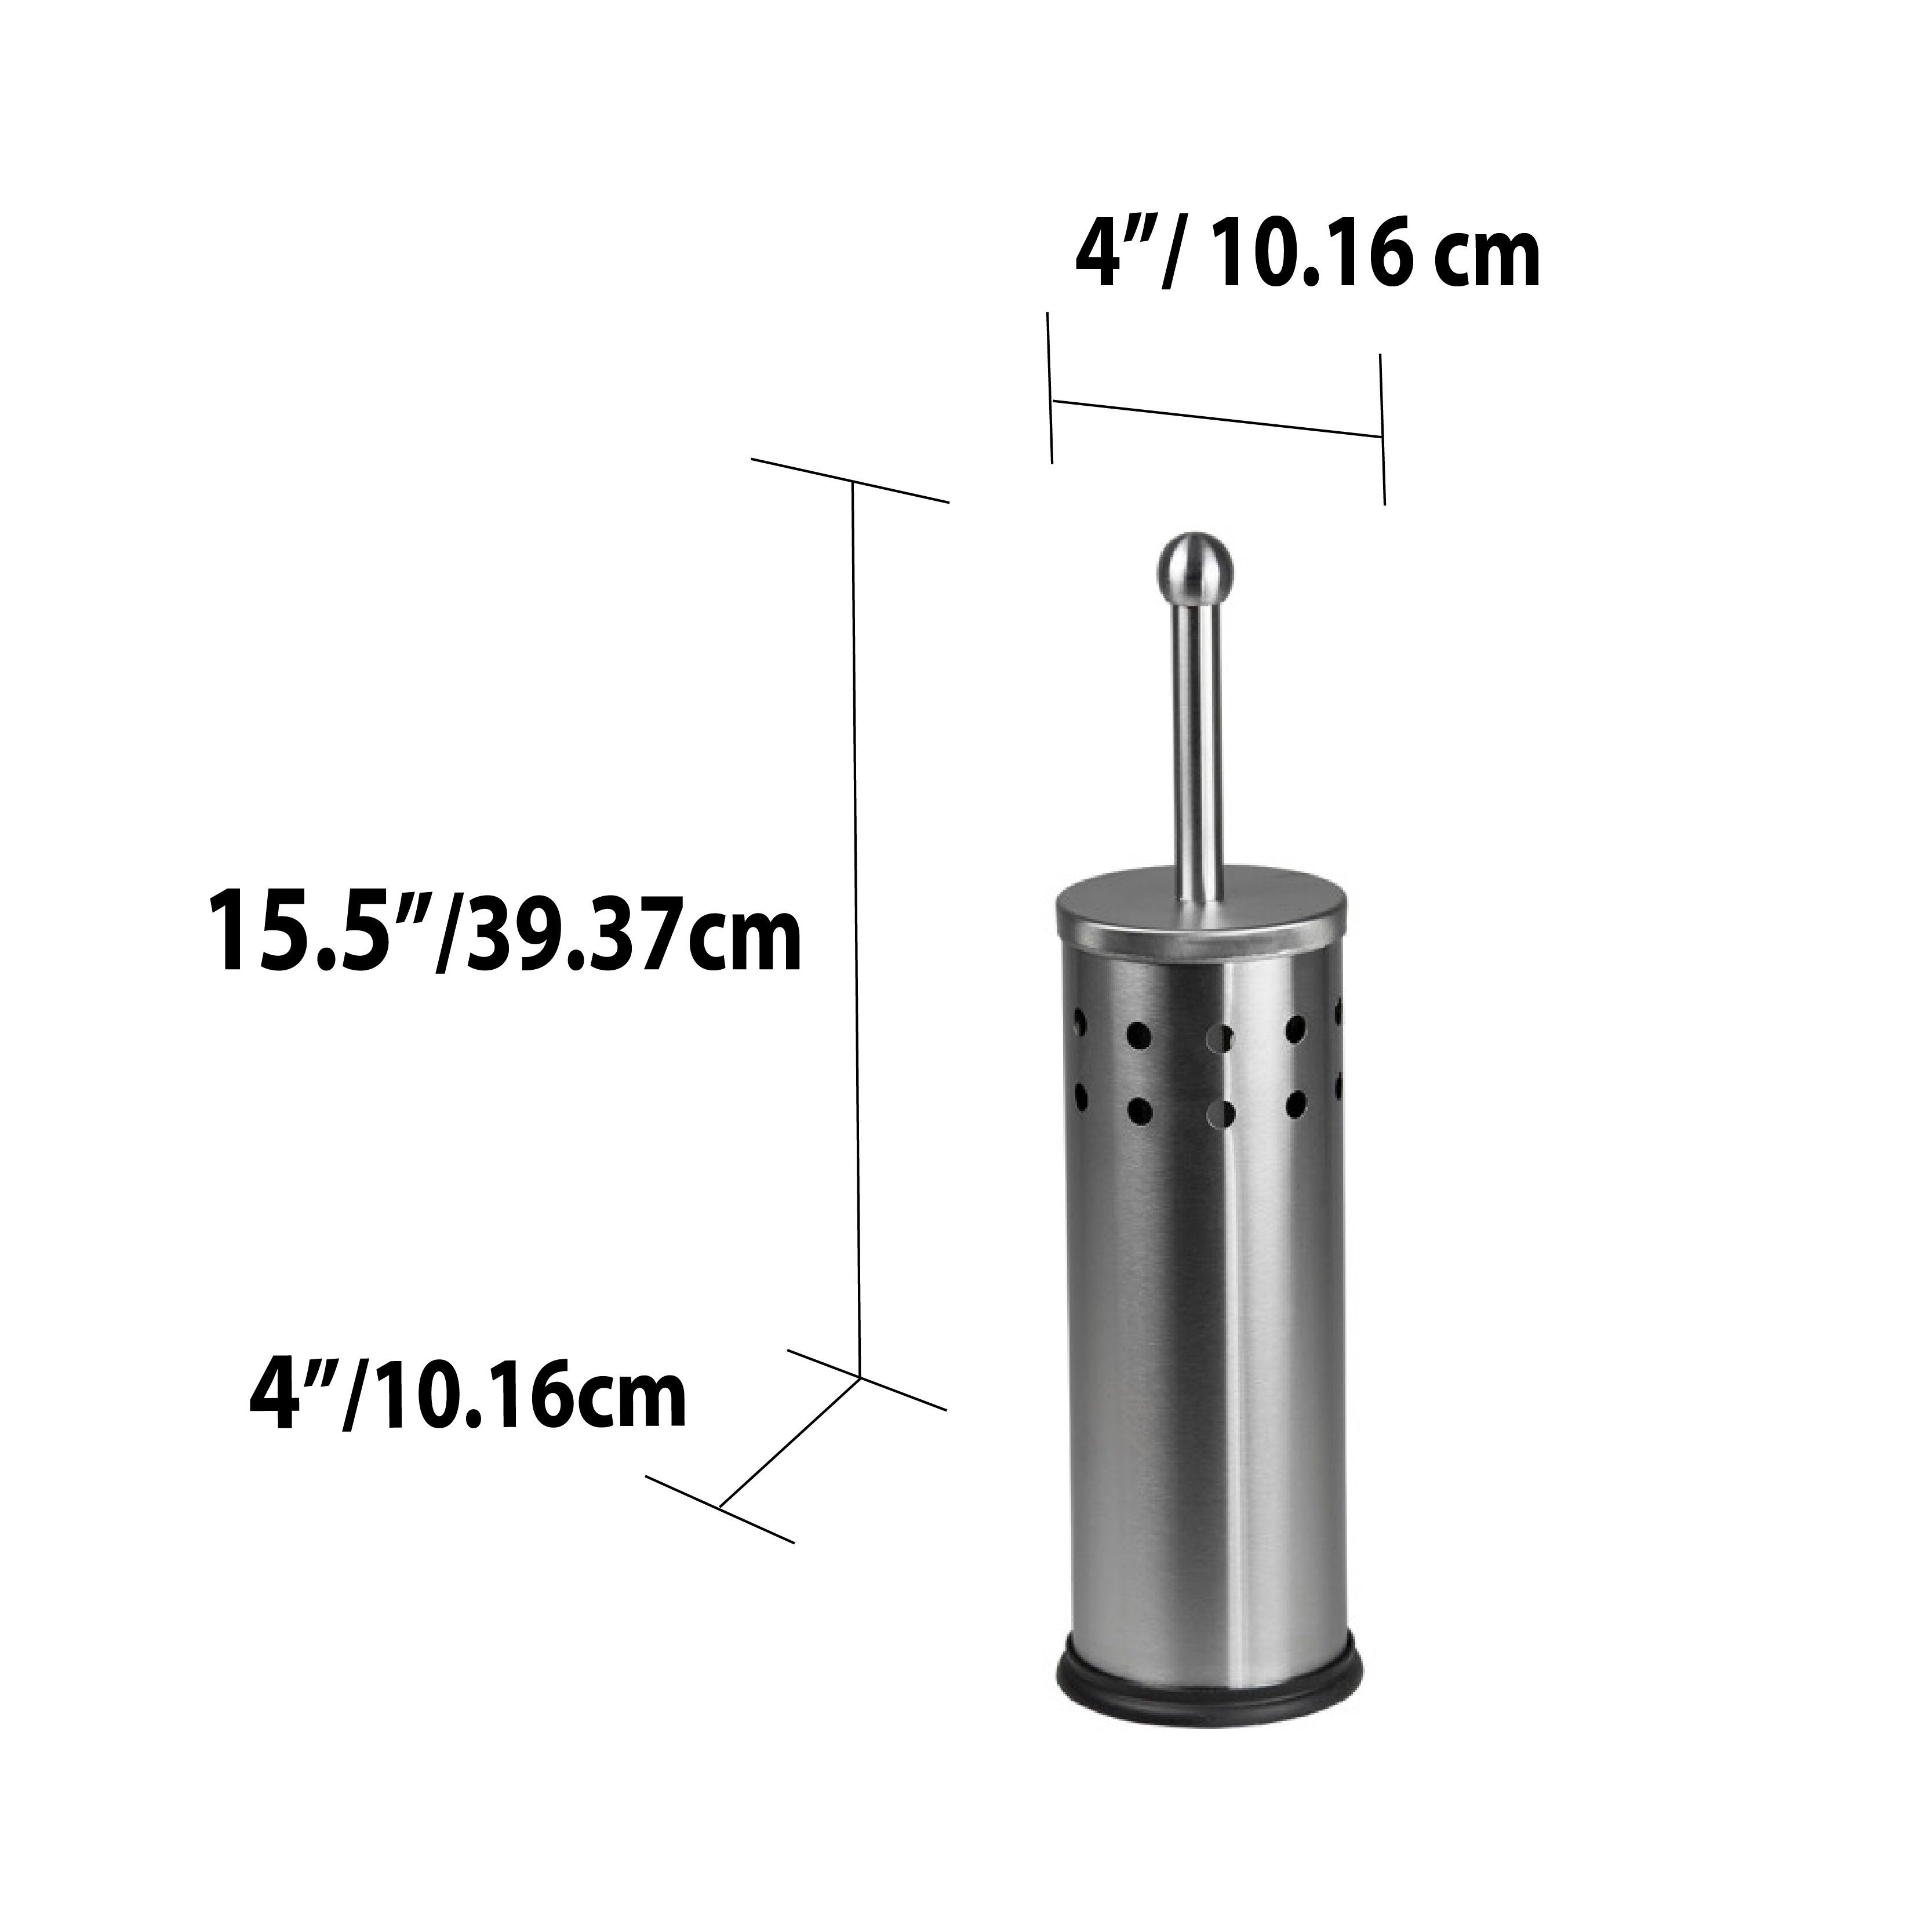 https://ak1.ostkcdn.com/images/products/10565563/Home-Basics-Brushed-Stainless-Steel-Tapered-Toilet-Brush-Holder-99711626-84ad-4244-9033-8c4ad5c56d53.jpg